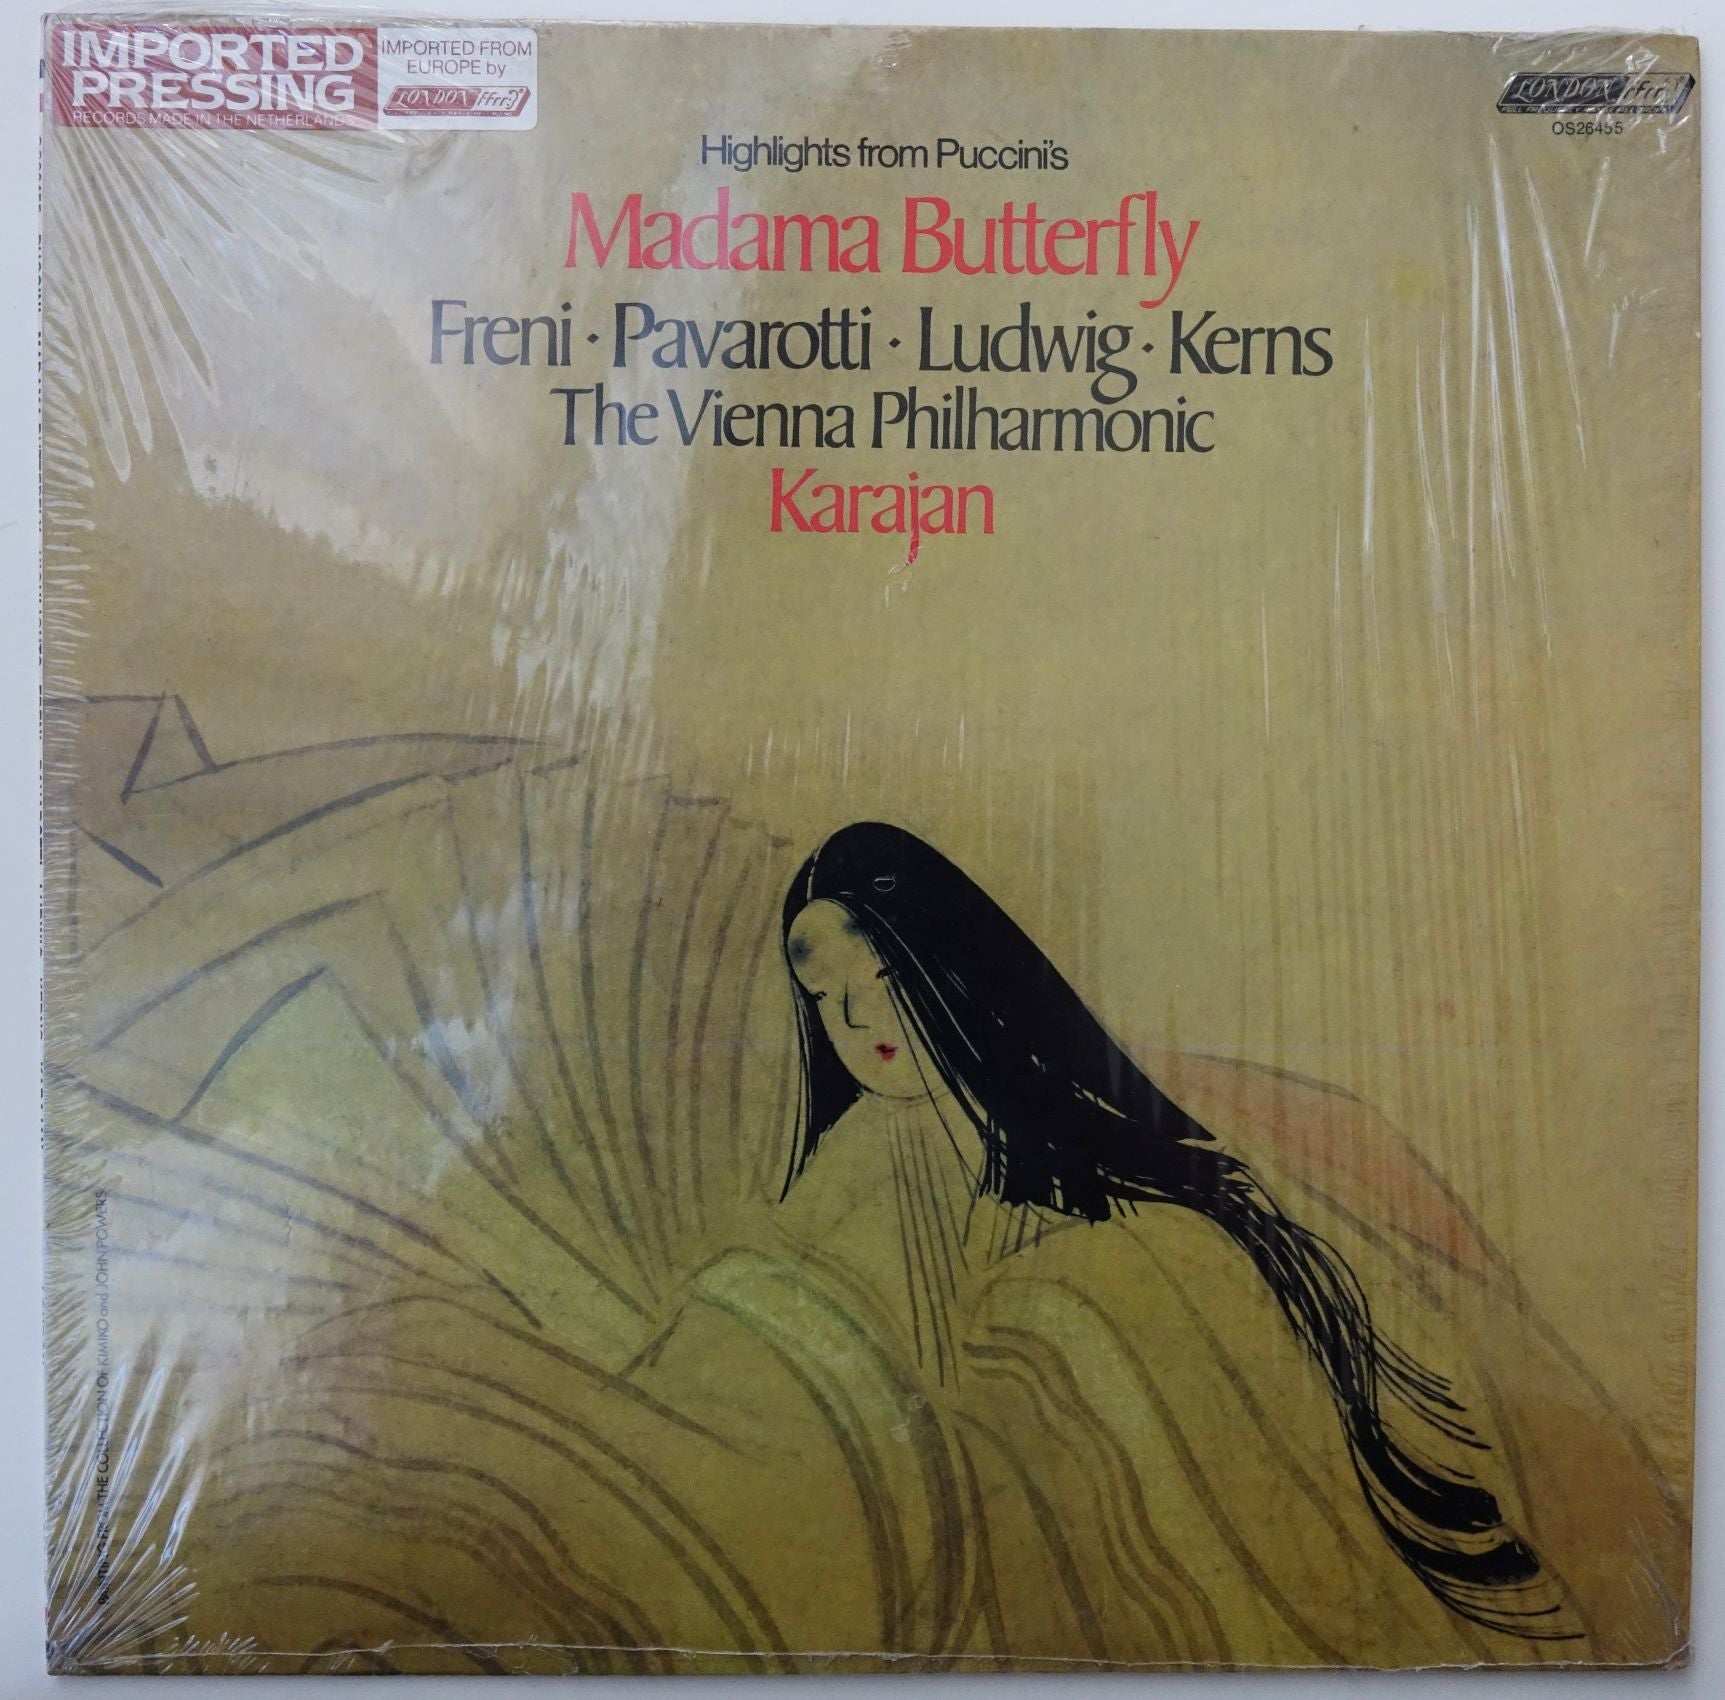 LON016: Highlights from Puccini's Madama Butterfly